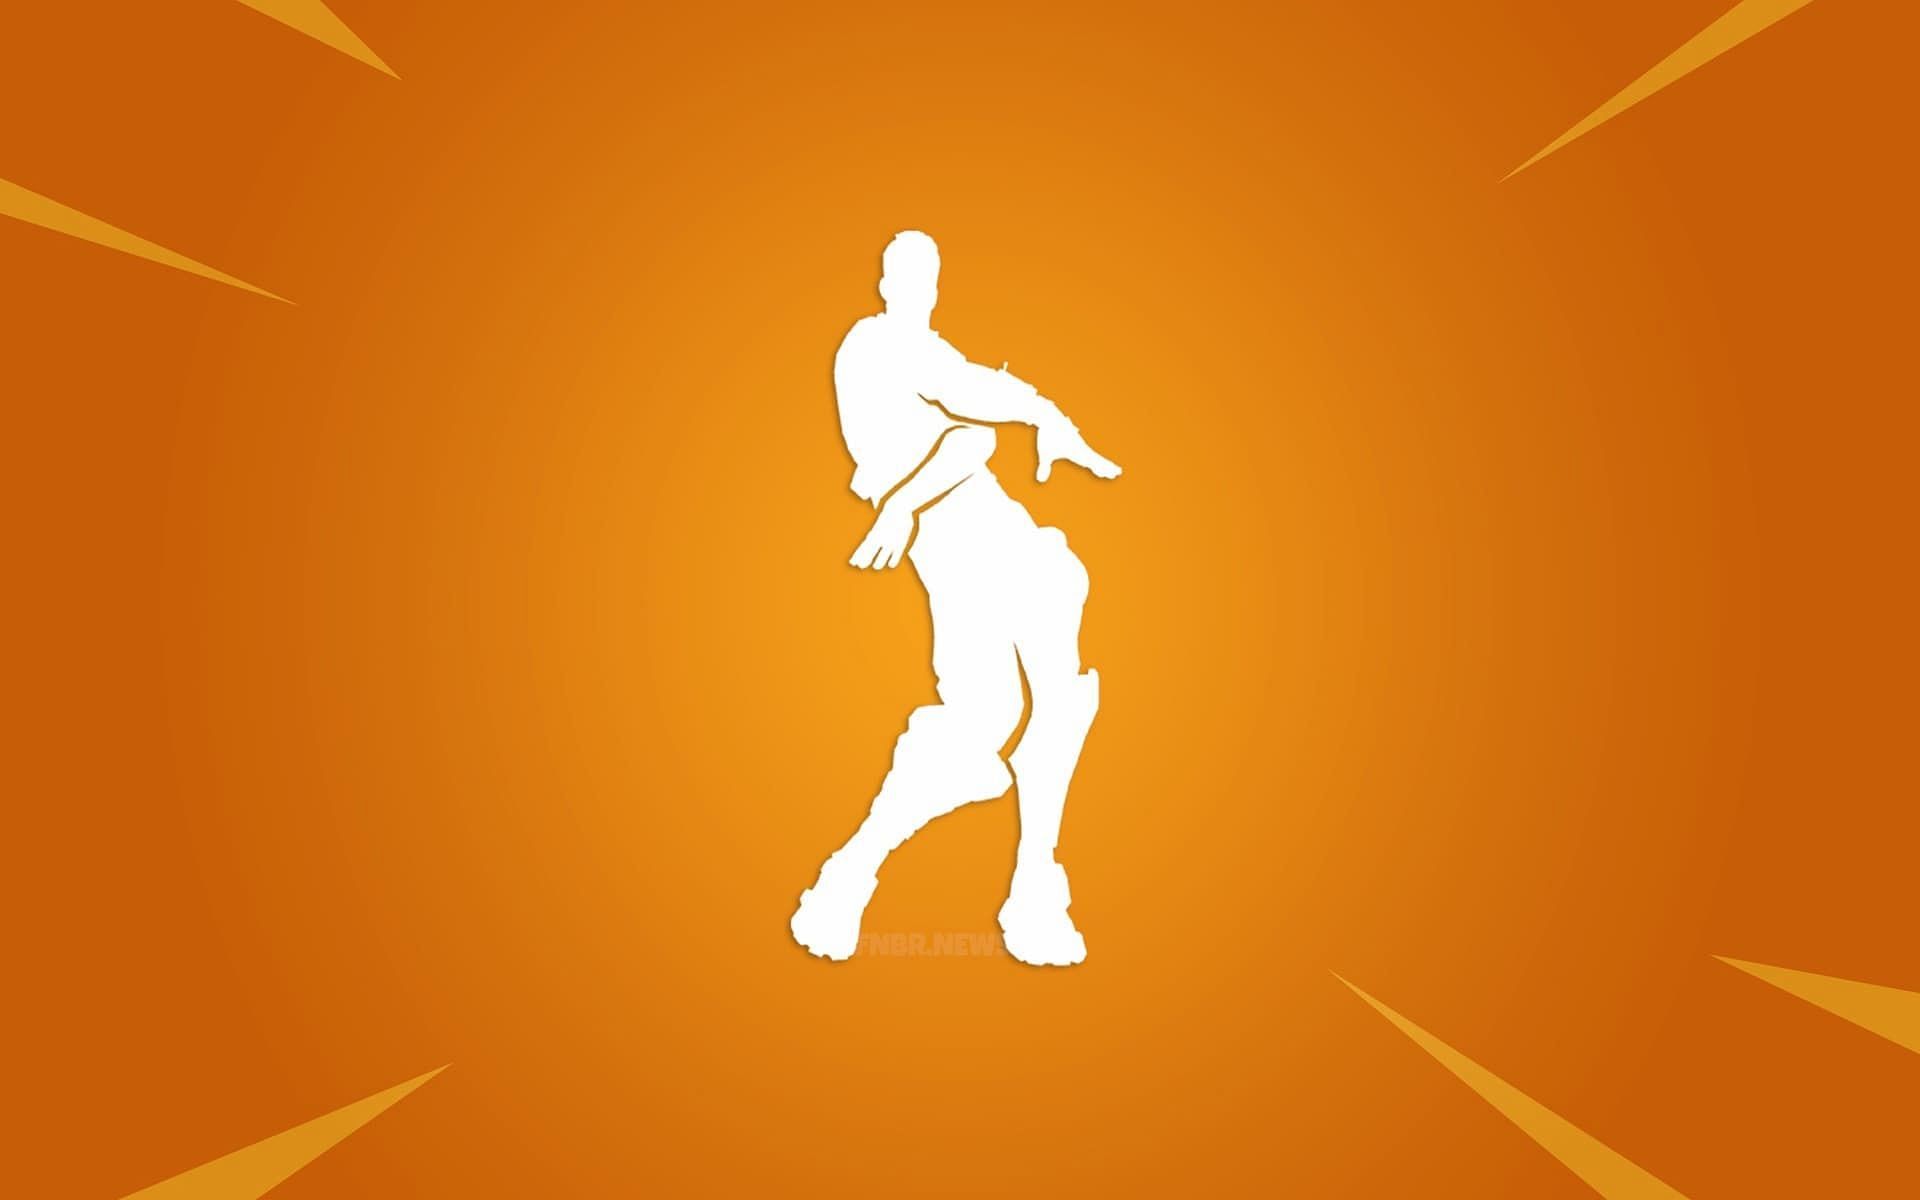 Emotes are how Fortnite players express themselves in-game (Image via Epic Games)